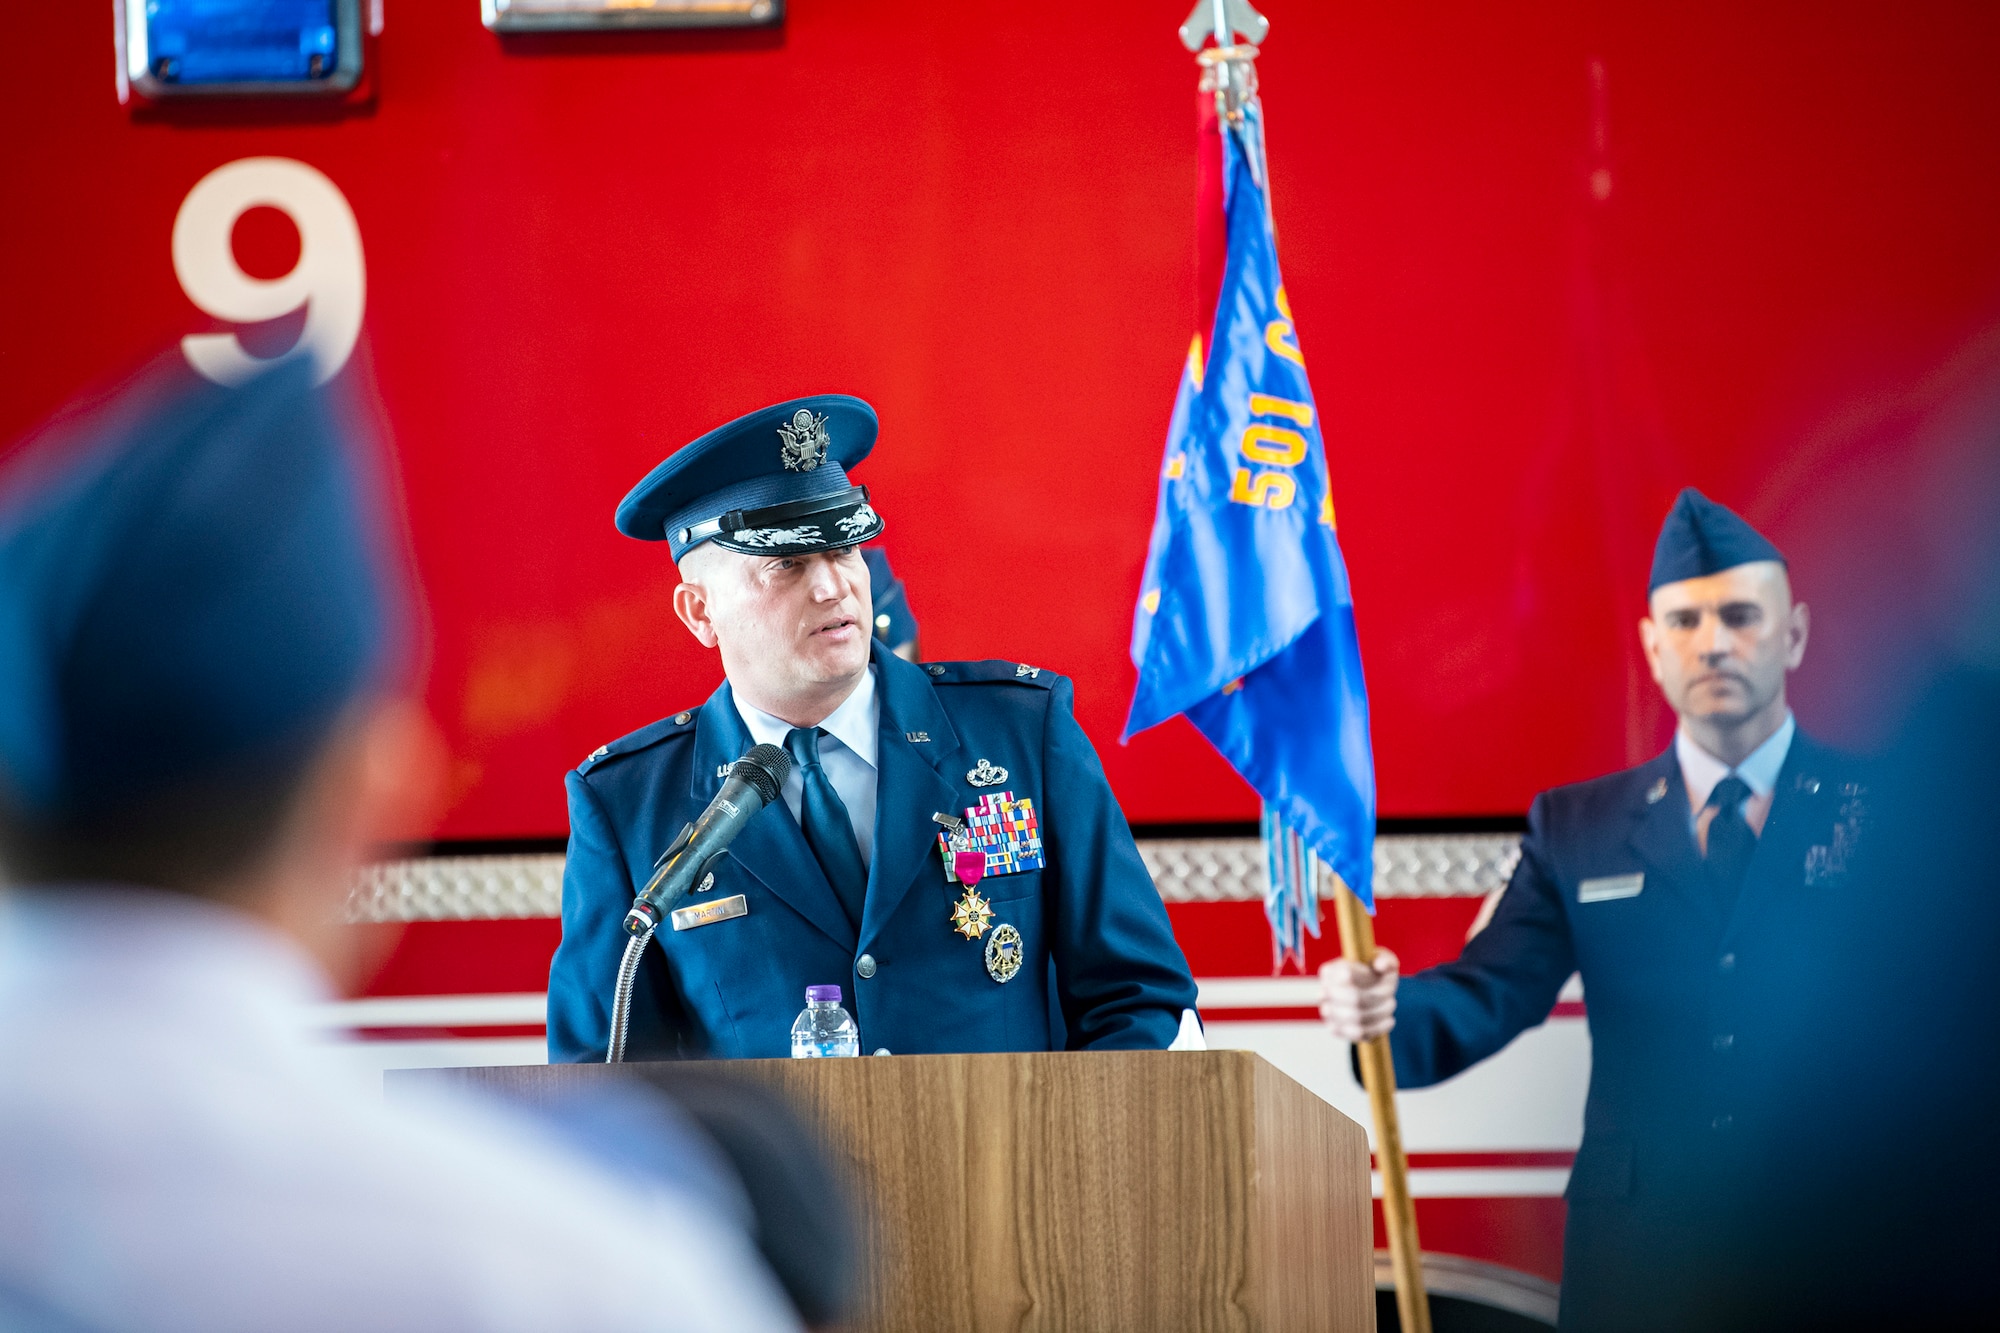 U.S. Air Force Col. Richard Martin, 423d Air Base Group outgoing commander, speaks during a change of command ceremony at RAF Alconbury, England, July 25, 2022. During his command, Martin led a unit that provided a full range of operational, logistical, engineering, medical and communications support and community services to 6,500 military and civilian personnel and families at 4 installations. (U.S. Air Force photo by Staff Sgt. Eugene Oliver)